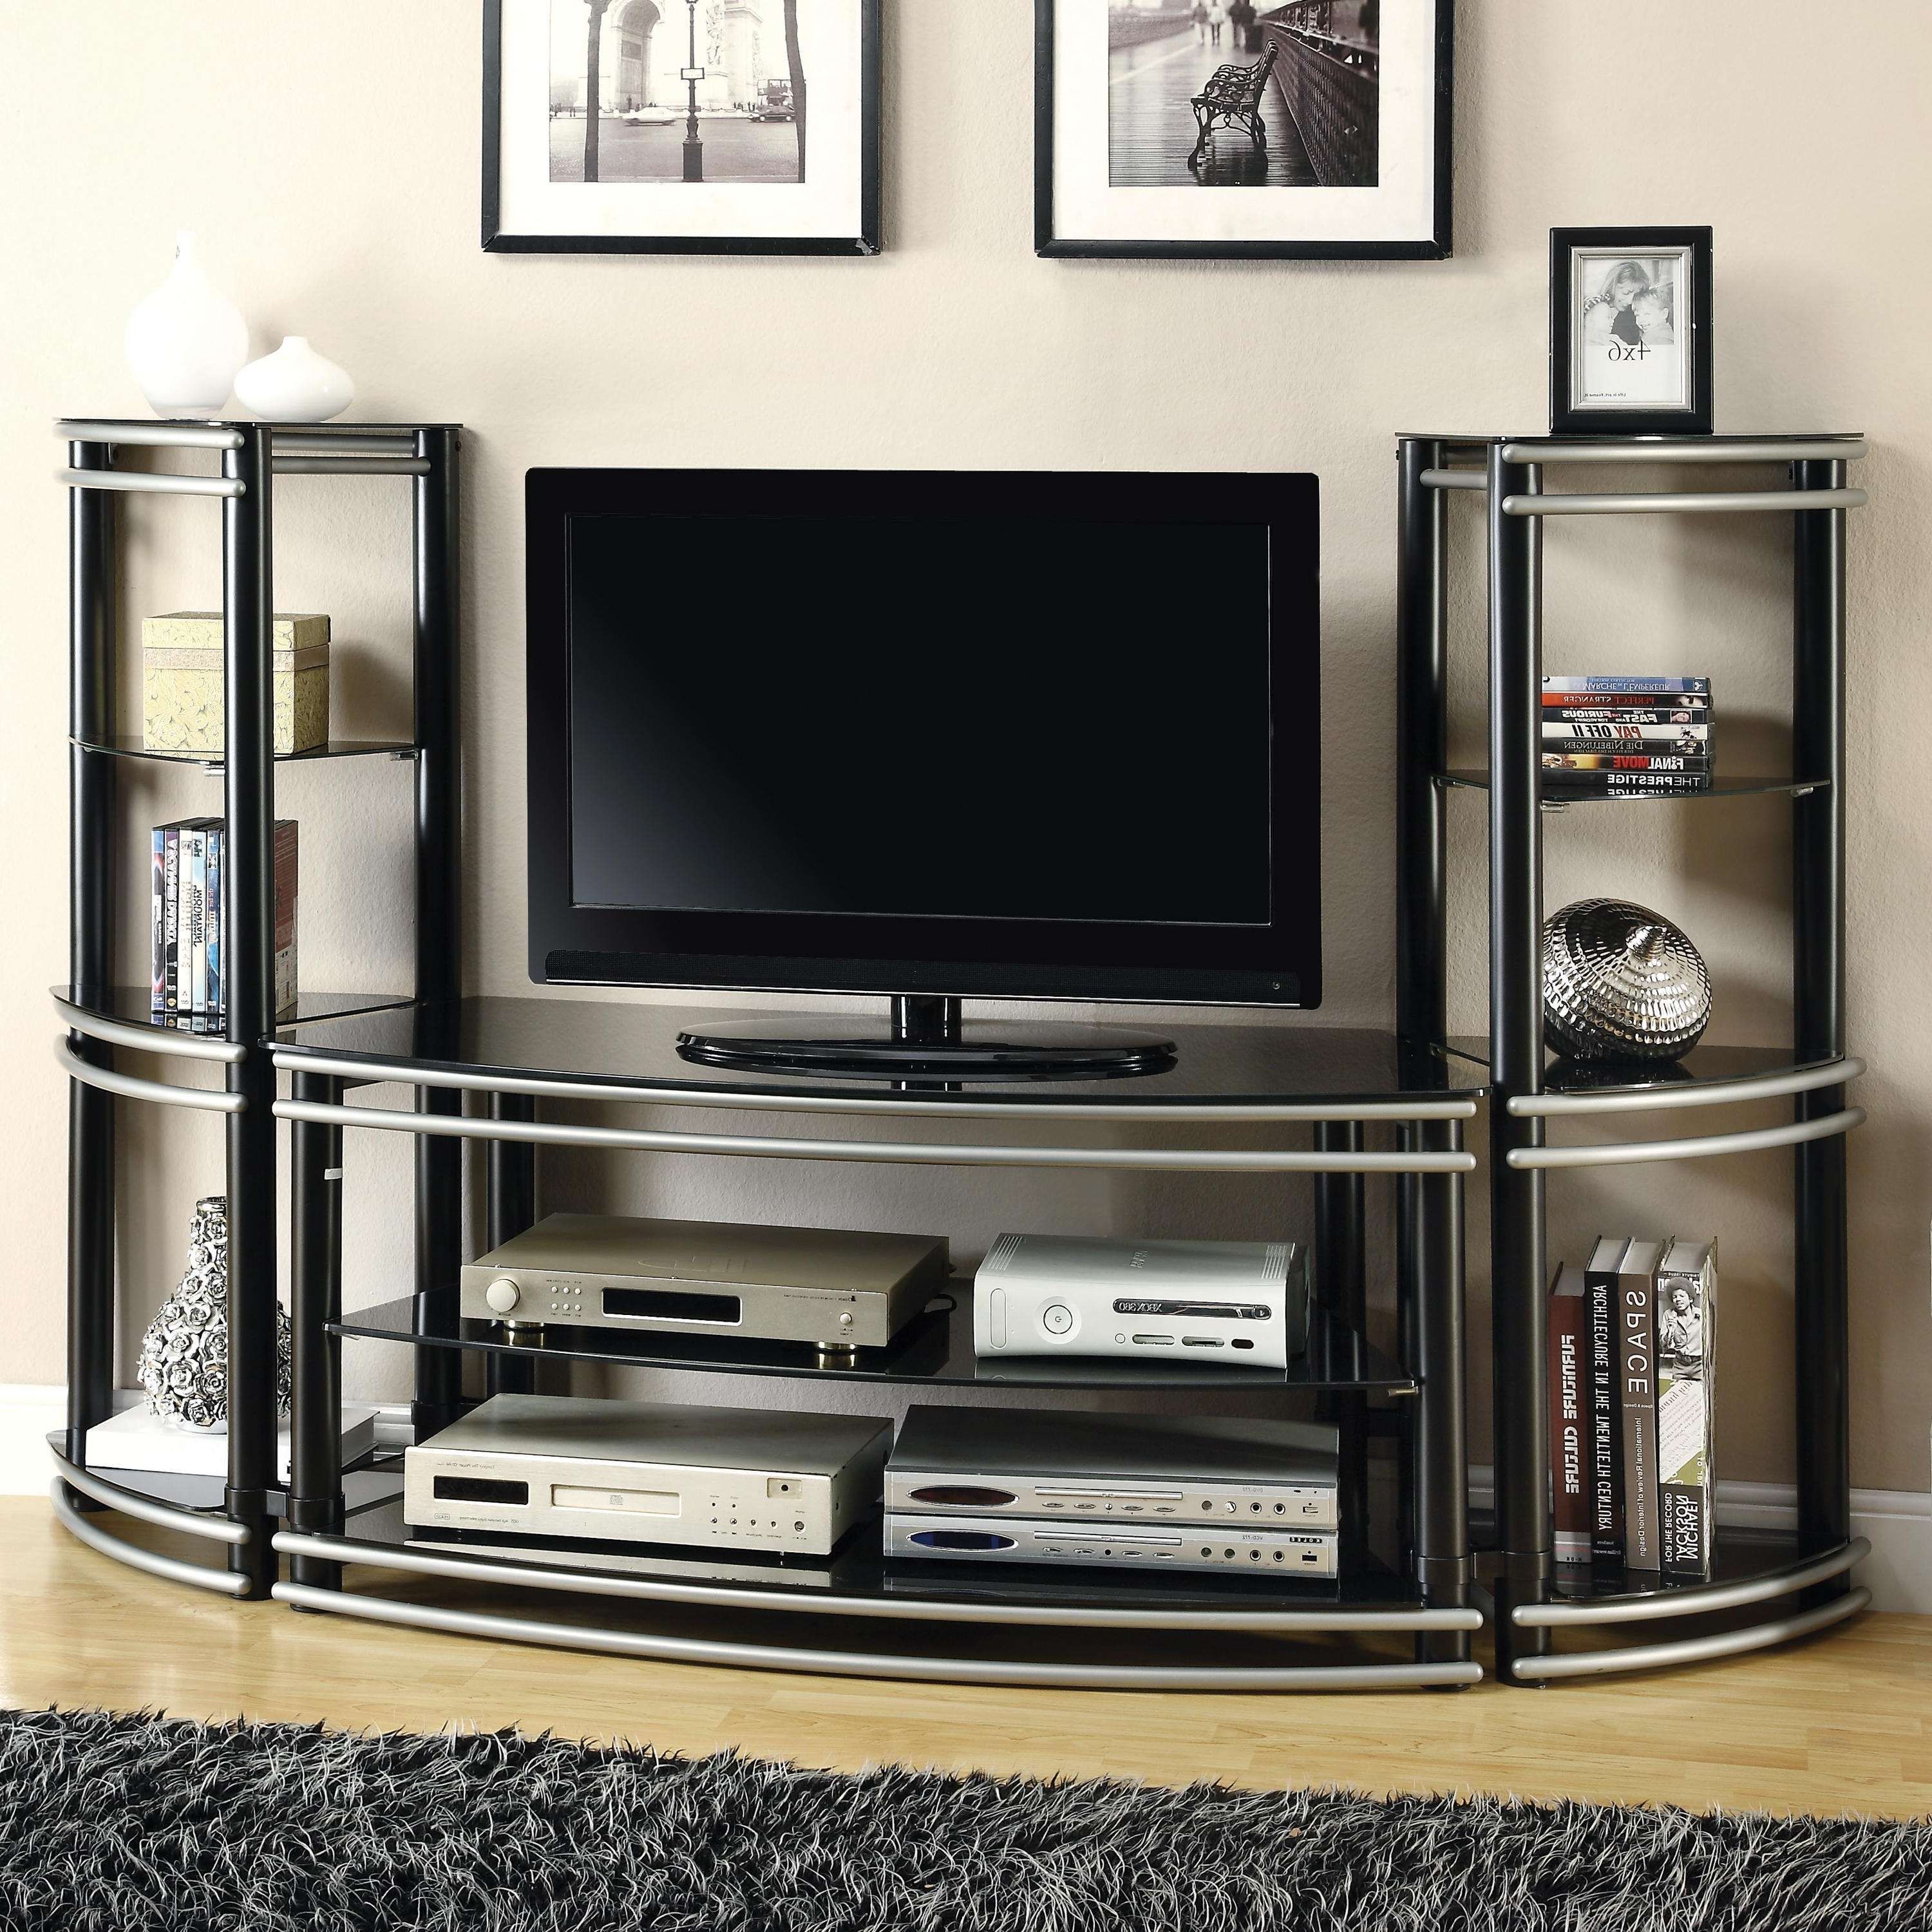 Wall Units: Interesting Wall Unit Tv Stand Entertainment Units For With Regard To Tv Stands Wall Units (View 1 of 15)